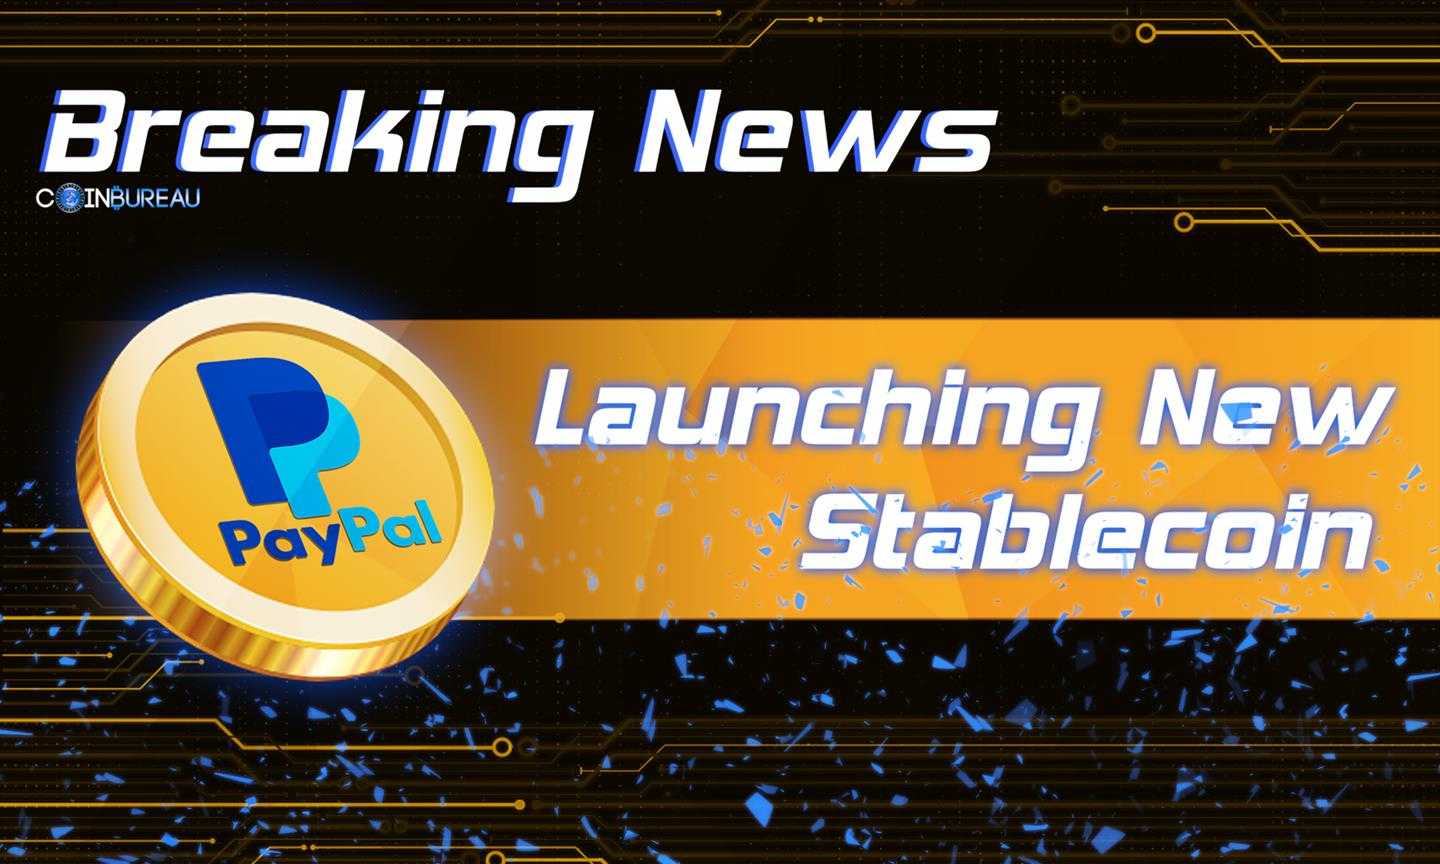 PayPal Looking At Launching New Stablecoin